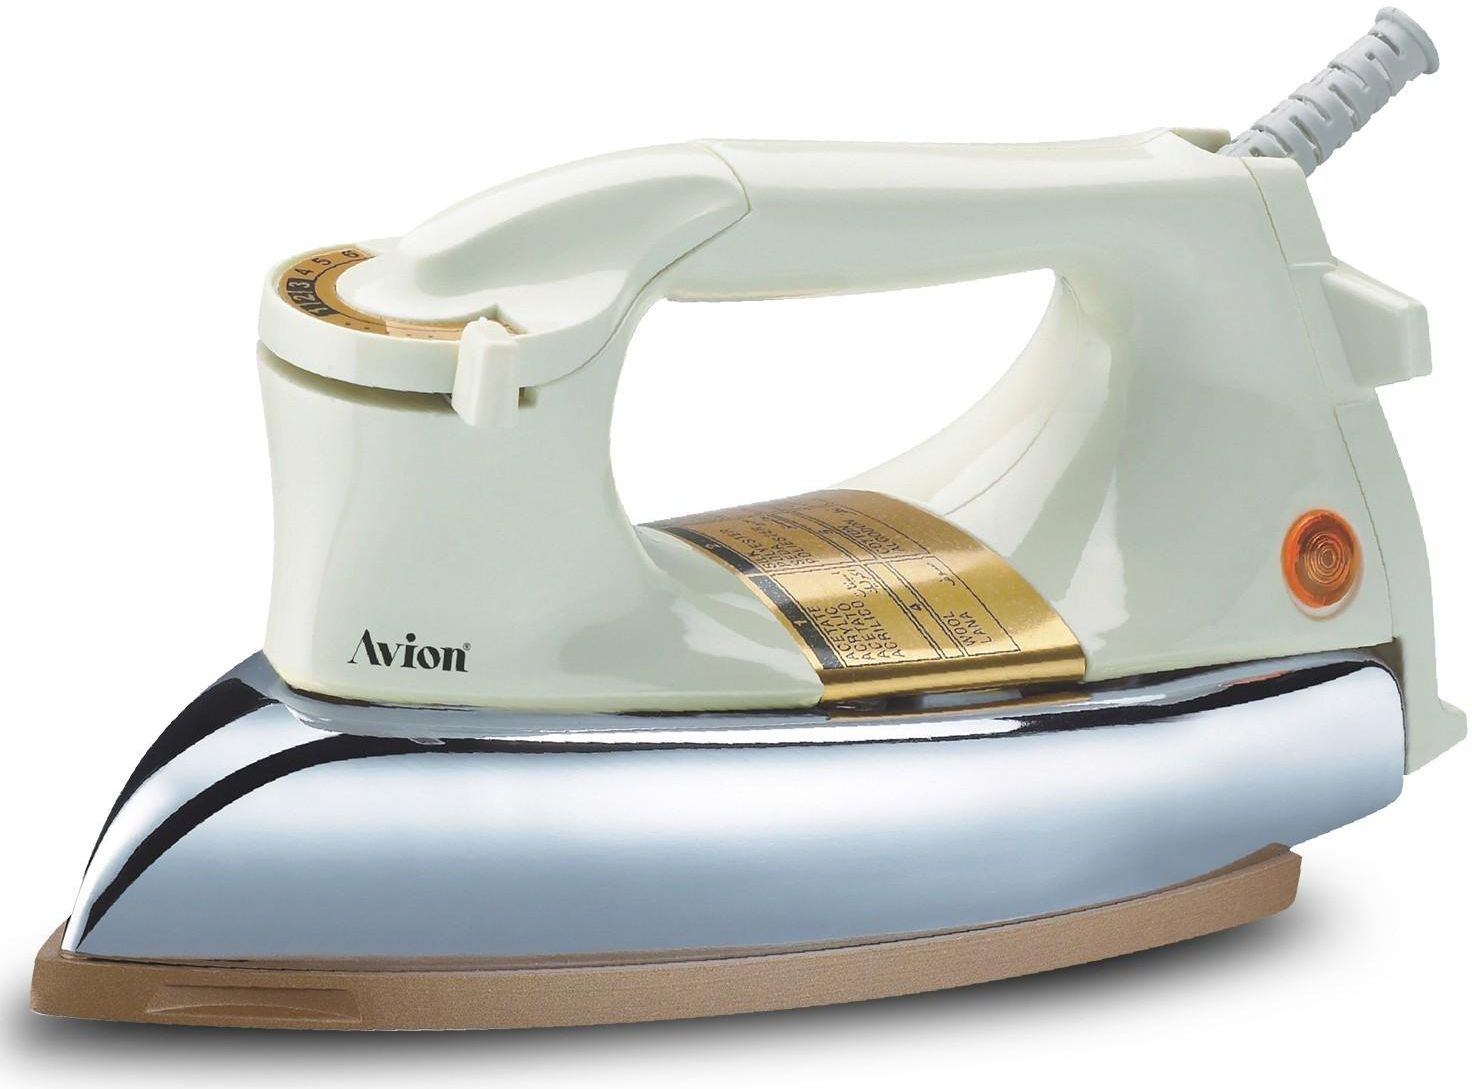 Avion 1200W Automatic Dry Iron, Electric Iron 60 Micron Ceramic Coated Sole Plate, Durable Automatic Weight Iron Box Auto Shut Off, Temperature Setting Dial, Overheat Protection - White | AHW23DI